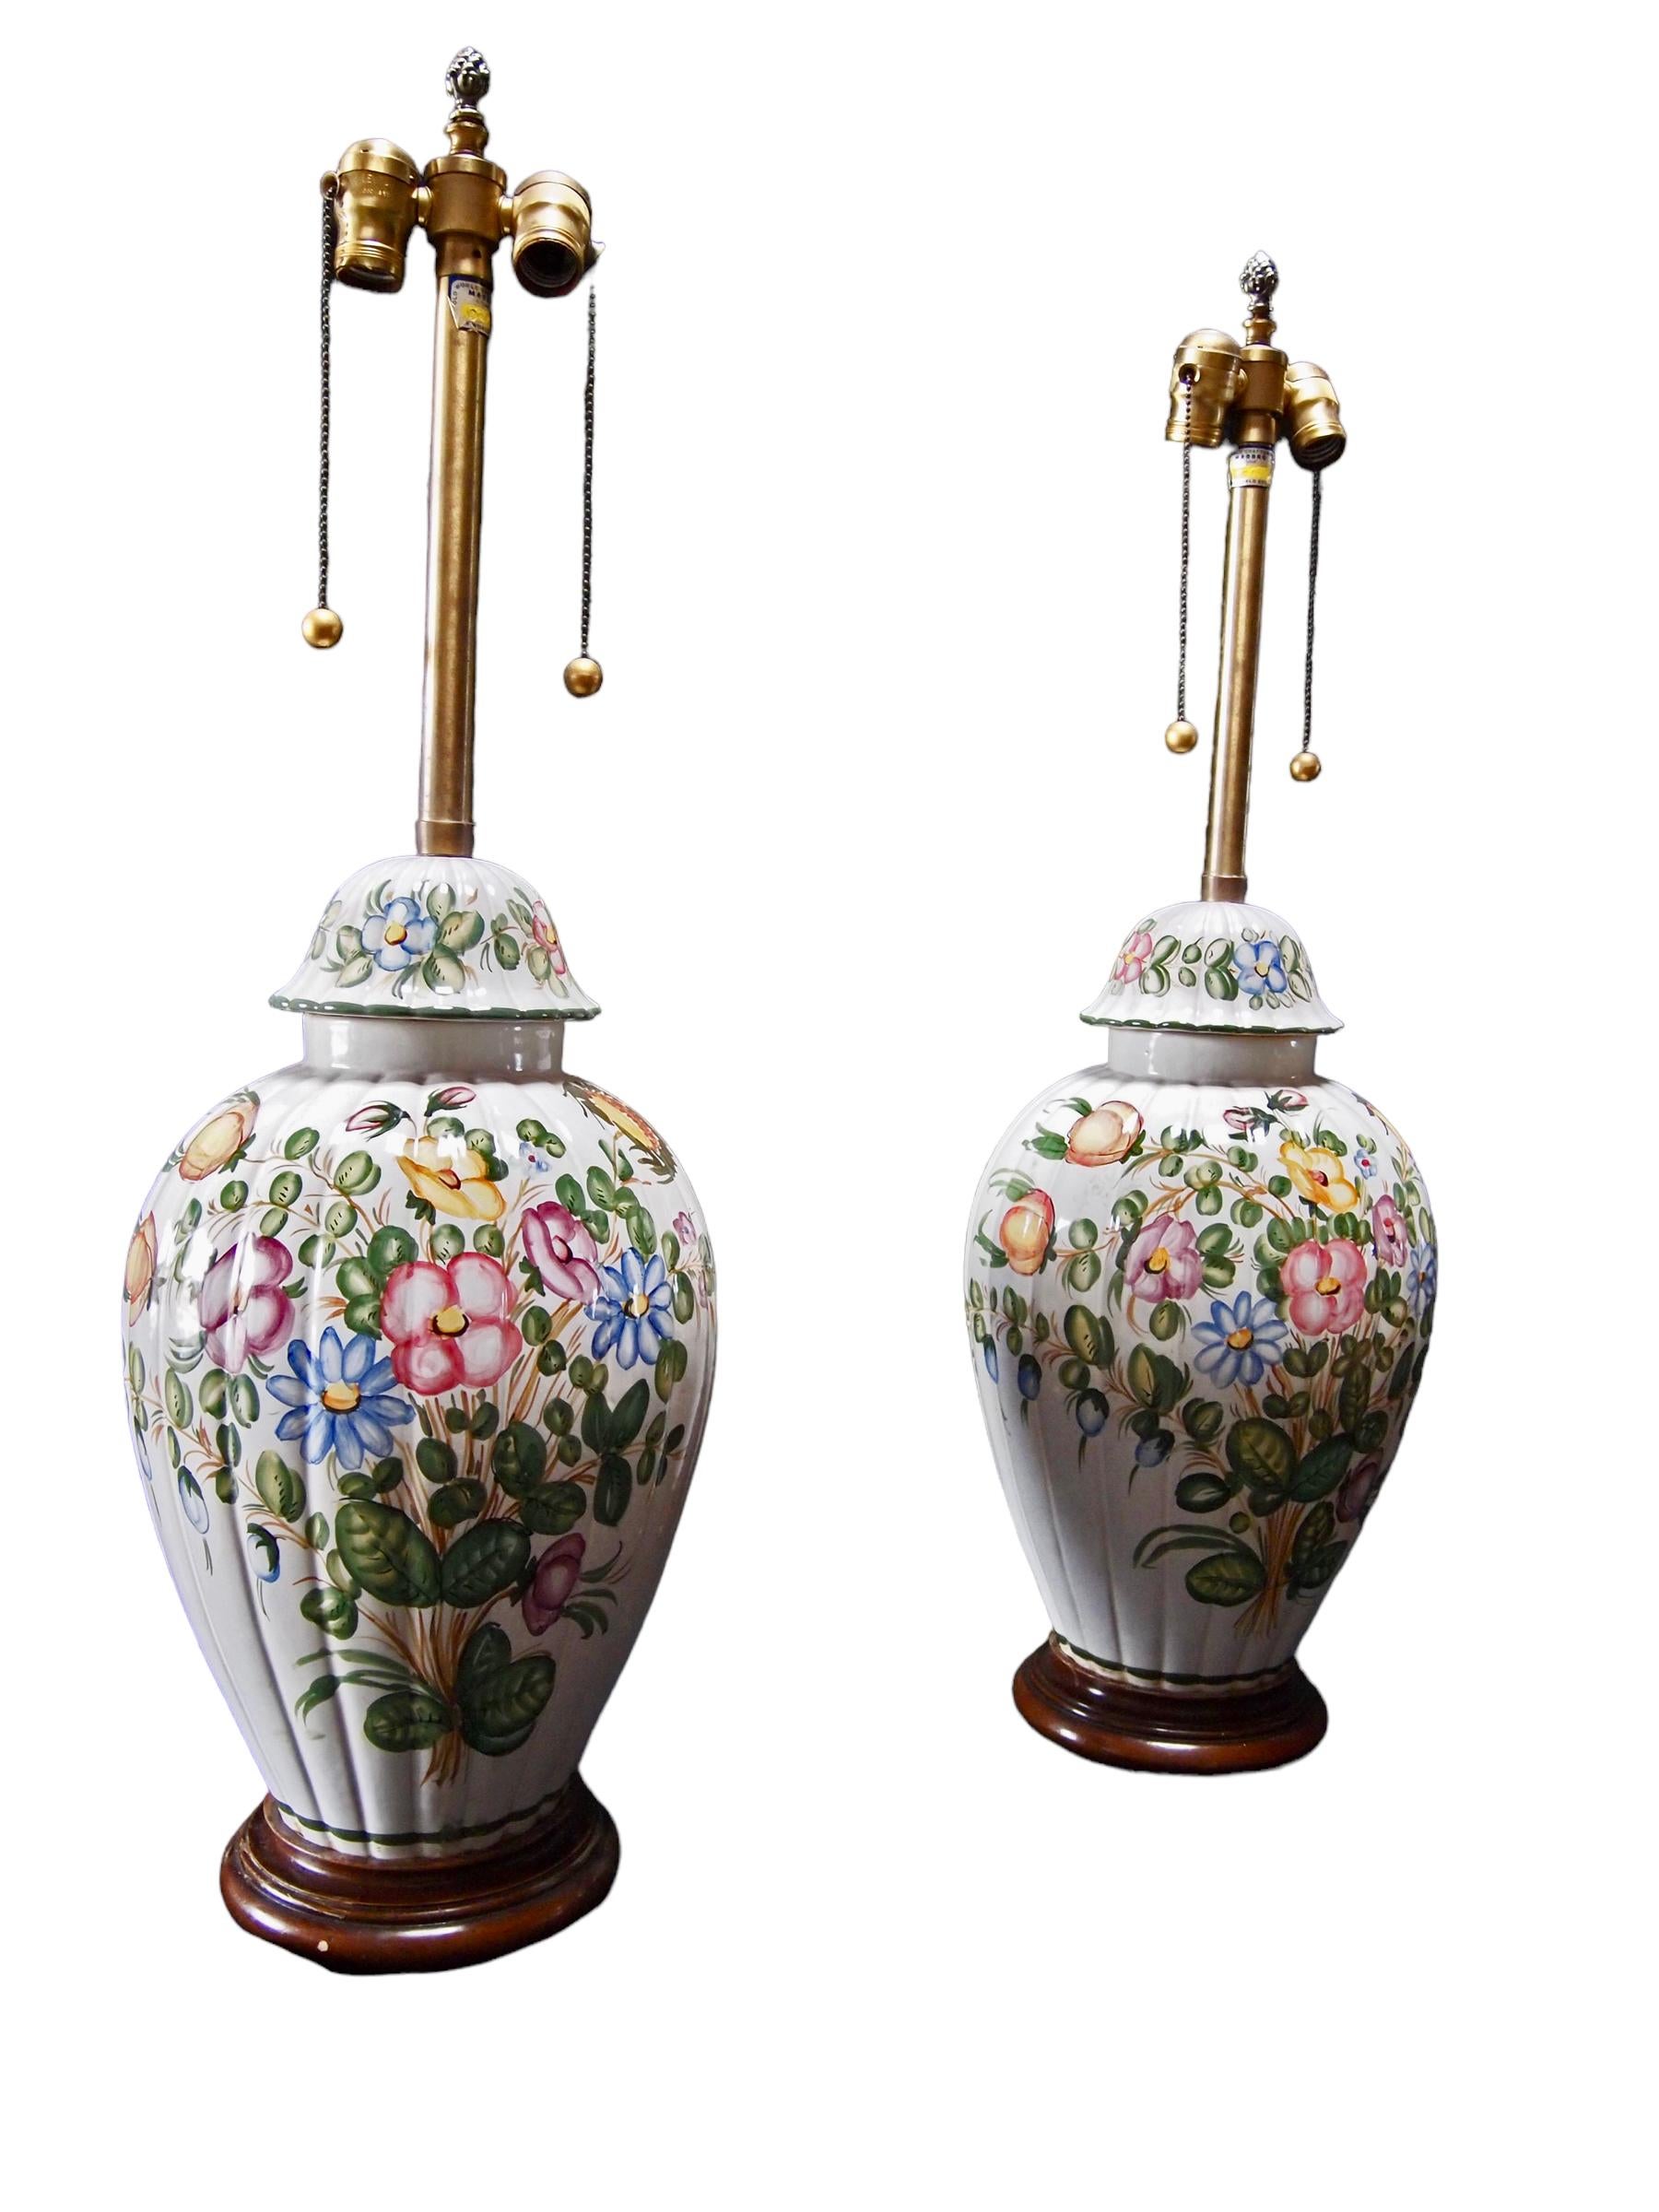 Mid-20th Century Pair of Large Floral Decorated Lamps Lamps by Marbro Lamp Co. For Sale